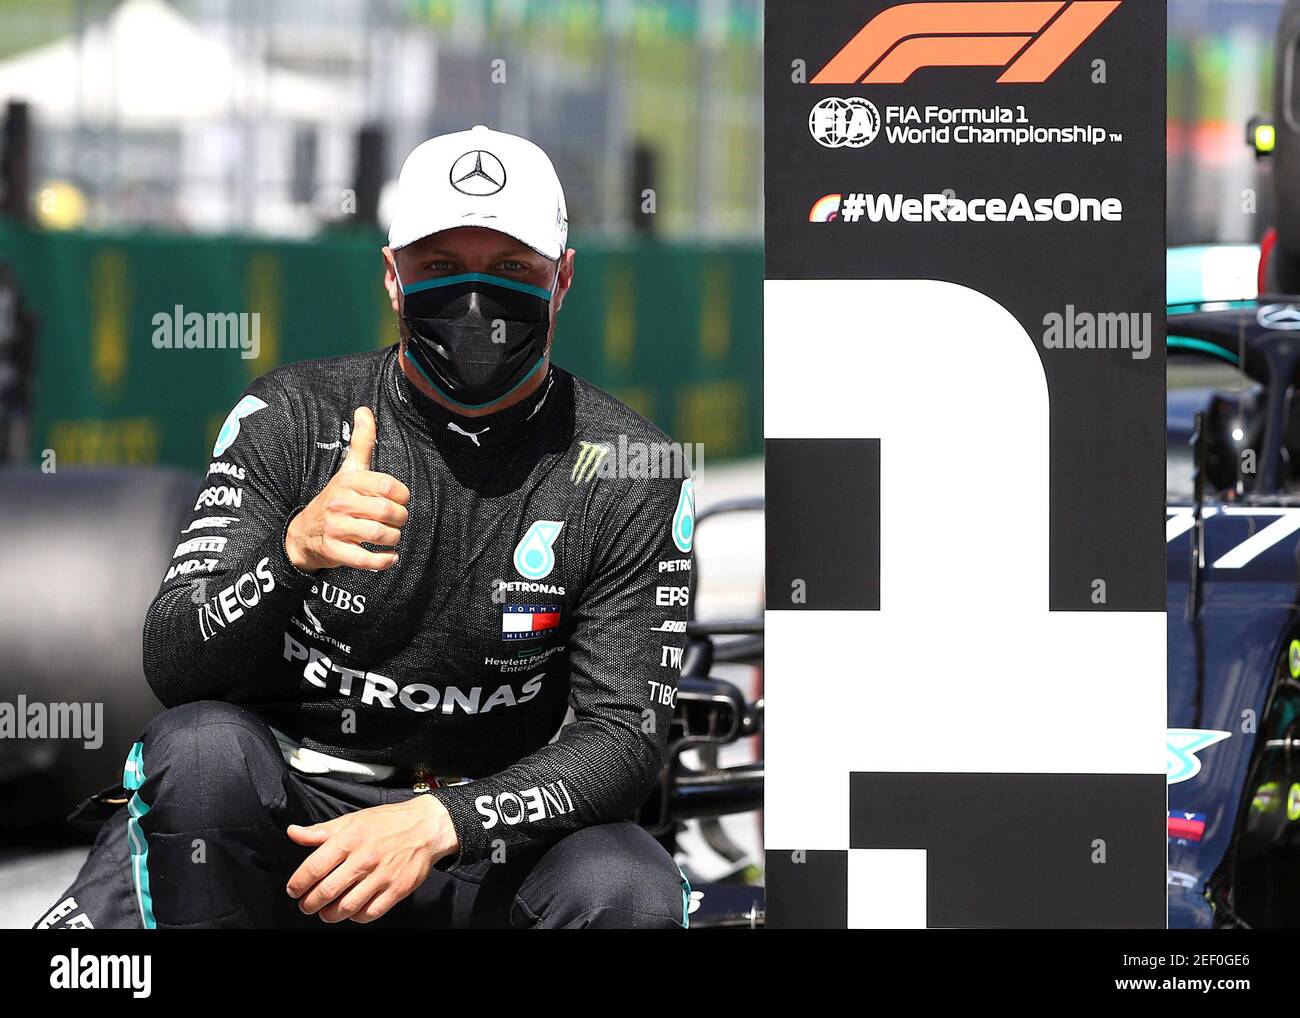 Formula One F1 - Austrian Grand Prix - Red Bull Ring, Spielberg, Styria, Austria - July 4, 2020   Mercedes' Valtteri Bottas wearing a protective face mask celebrates after qualifying in pole position, as F1 resumes following the outbreak of the coronavirus disease (COVID-19)   Mark Thompson/Pool via REUTERS Stock Photo